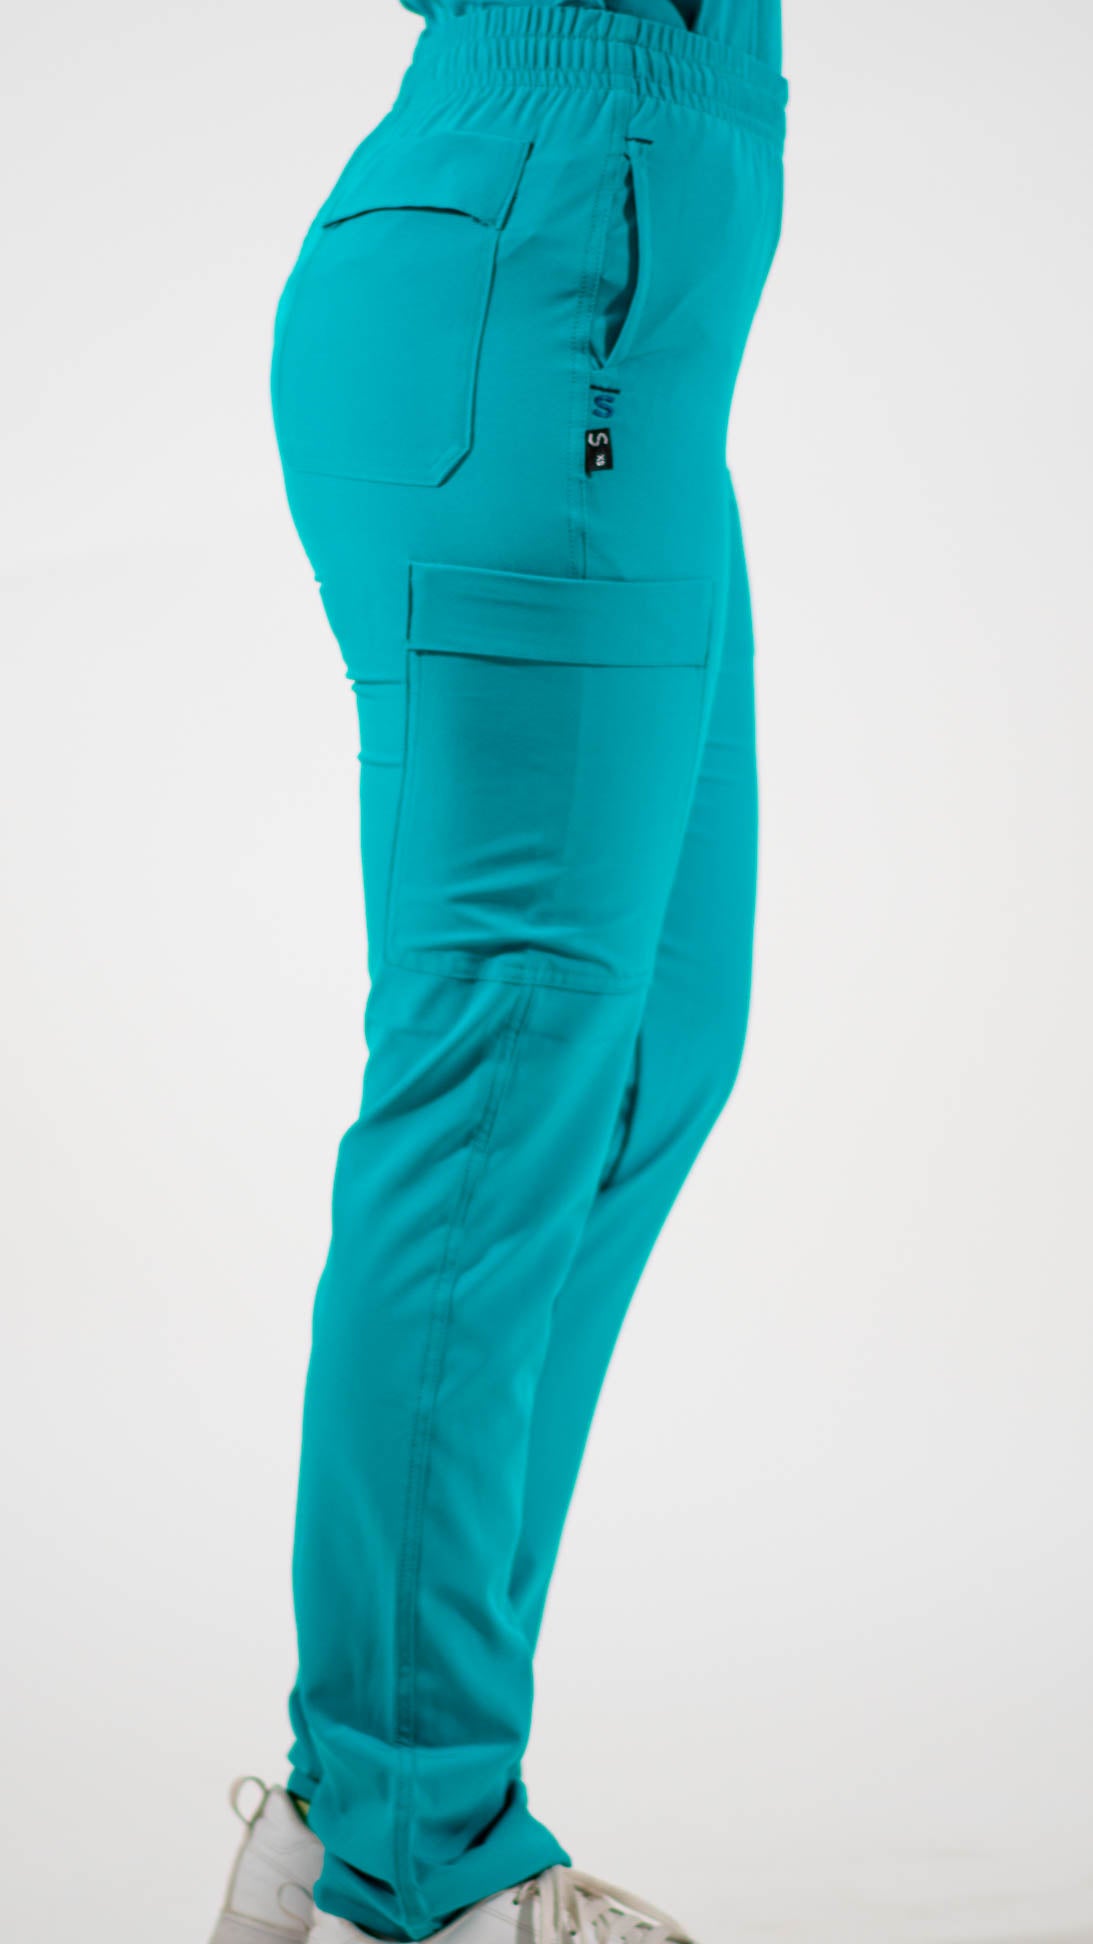 Women's 6 Pockets Fways Green Pants – S-FOR-ME Scrubs